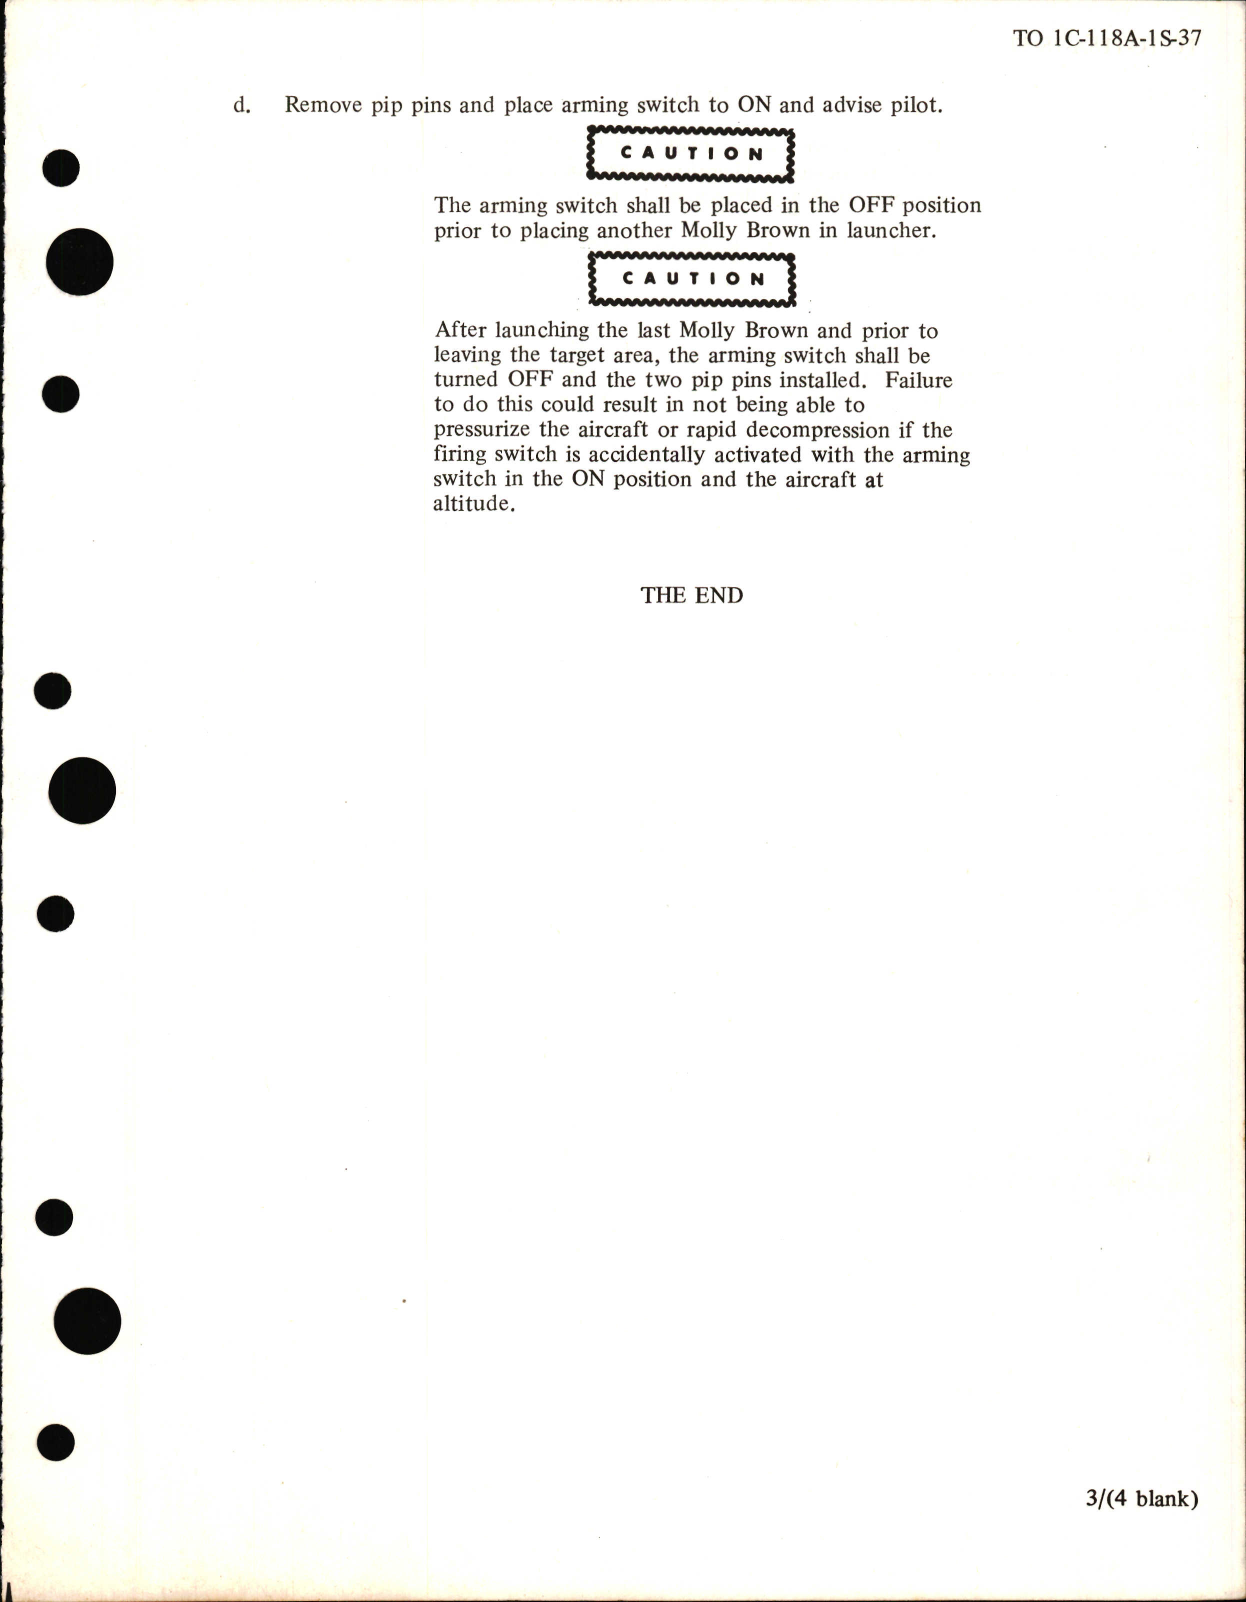 Sample page 7 from AirCorps Library document: Flight Manual for C-118A and VC-118A